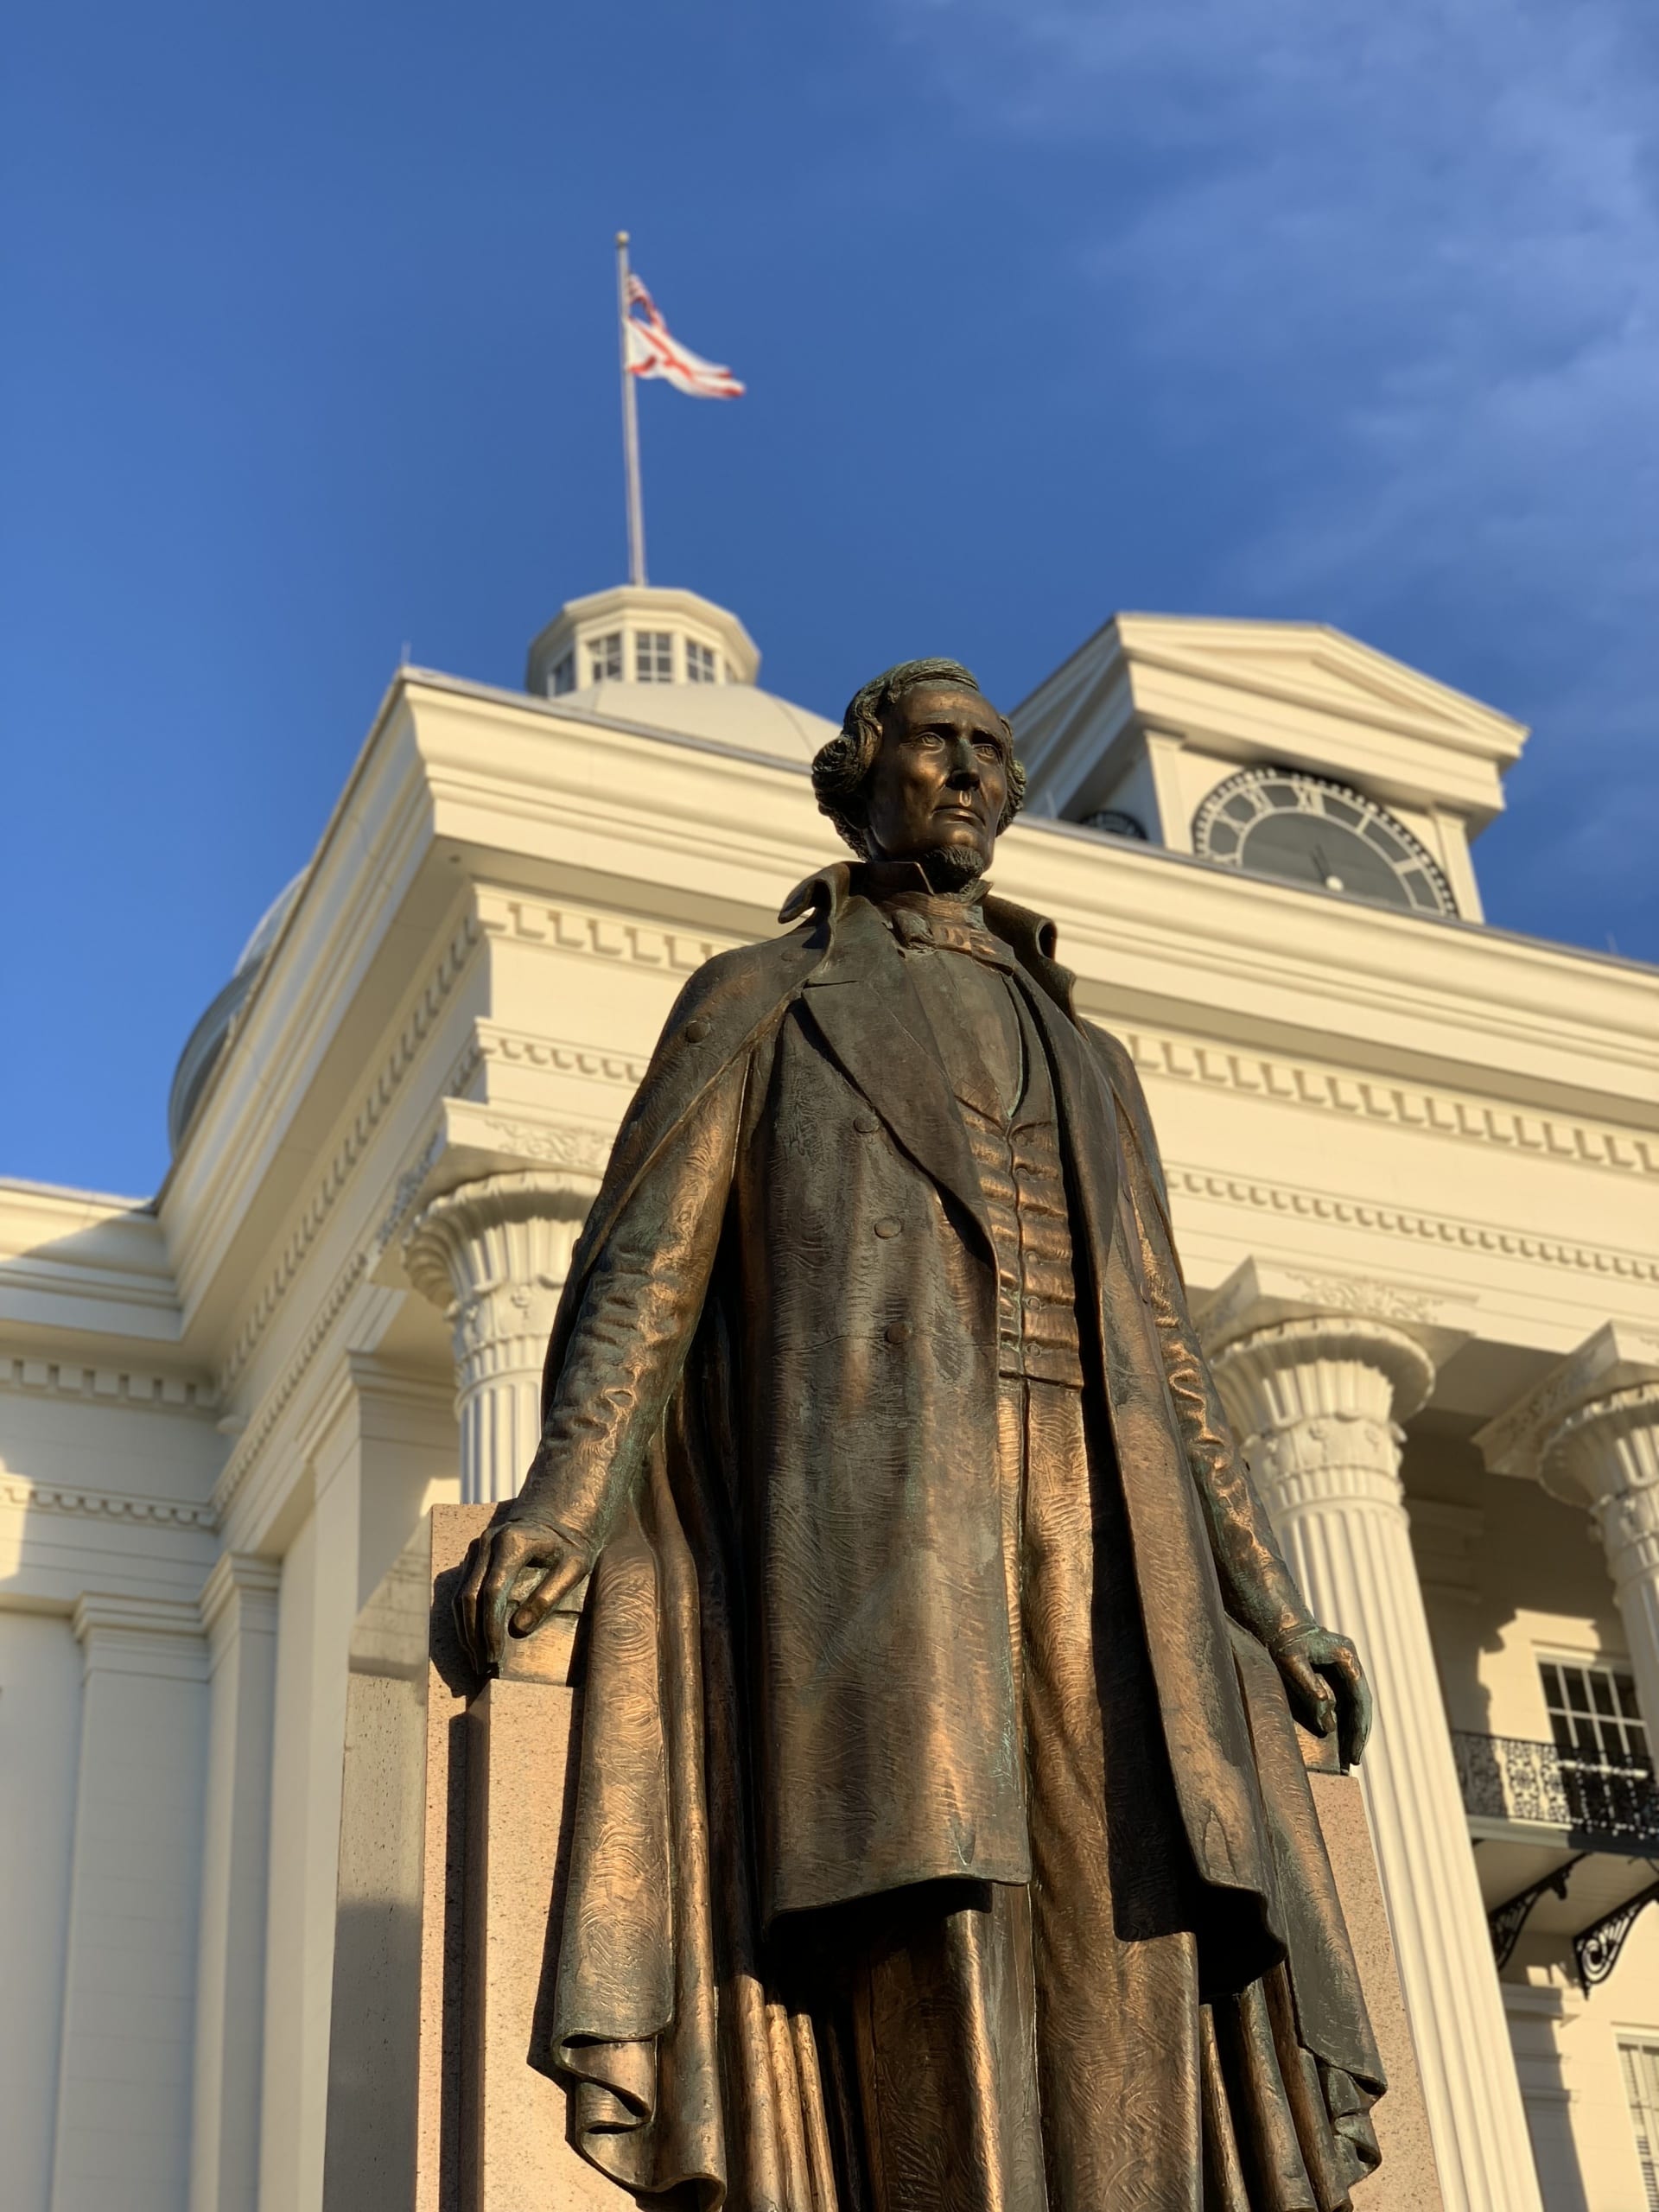 over life size bronze sculpture of Jefferson Davis with arms outstretched